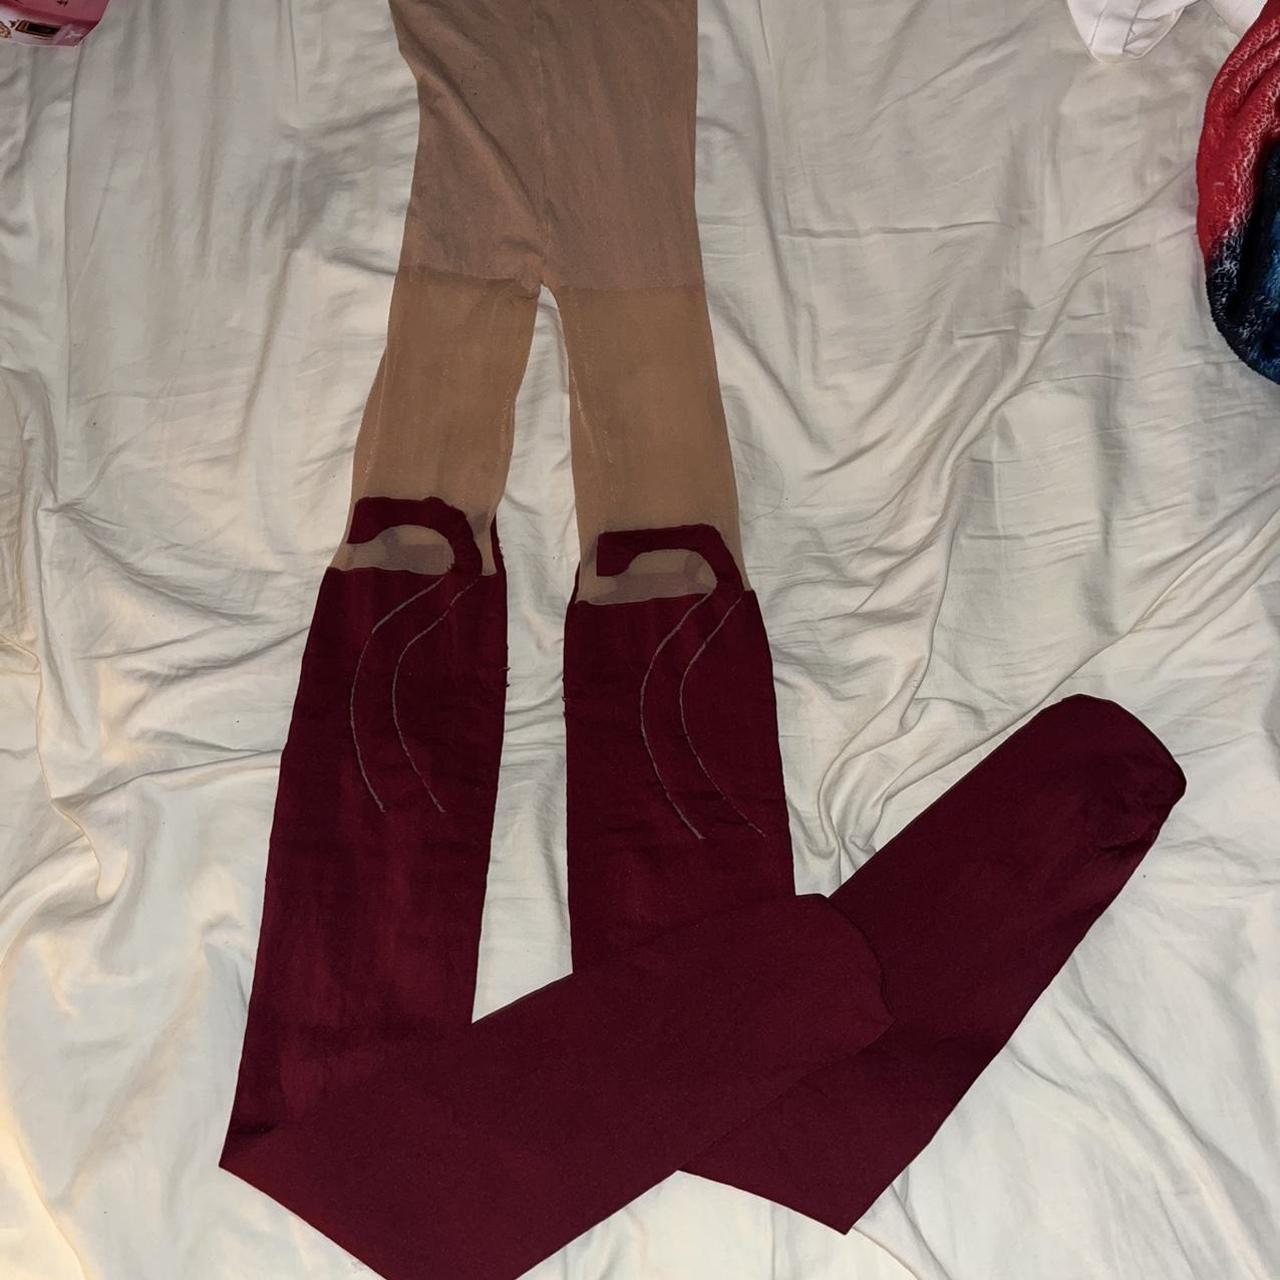 Hot Topic Women's Burgundy and Tan Hosiery-tights (3)